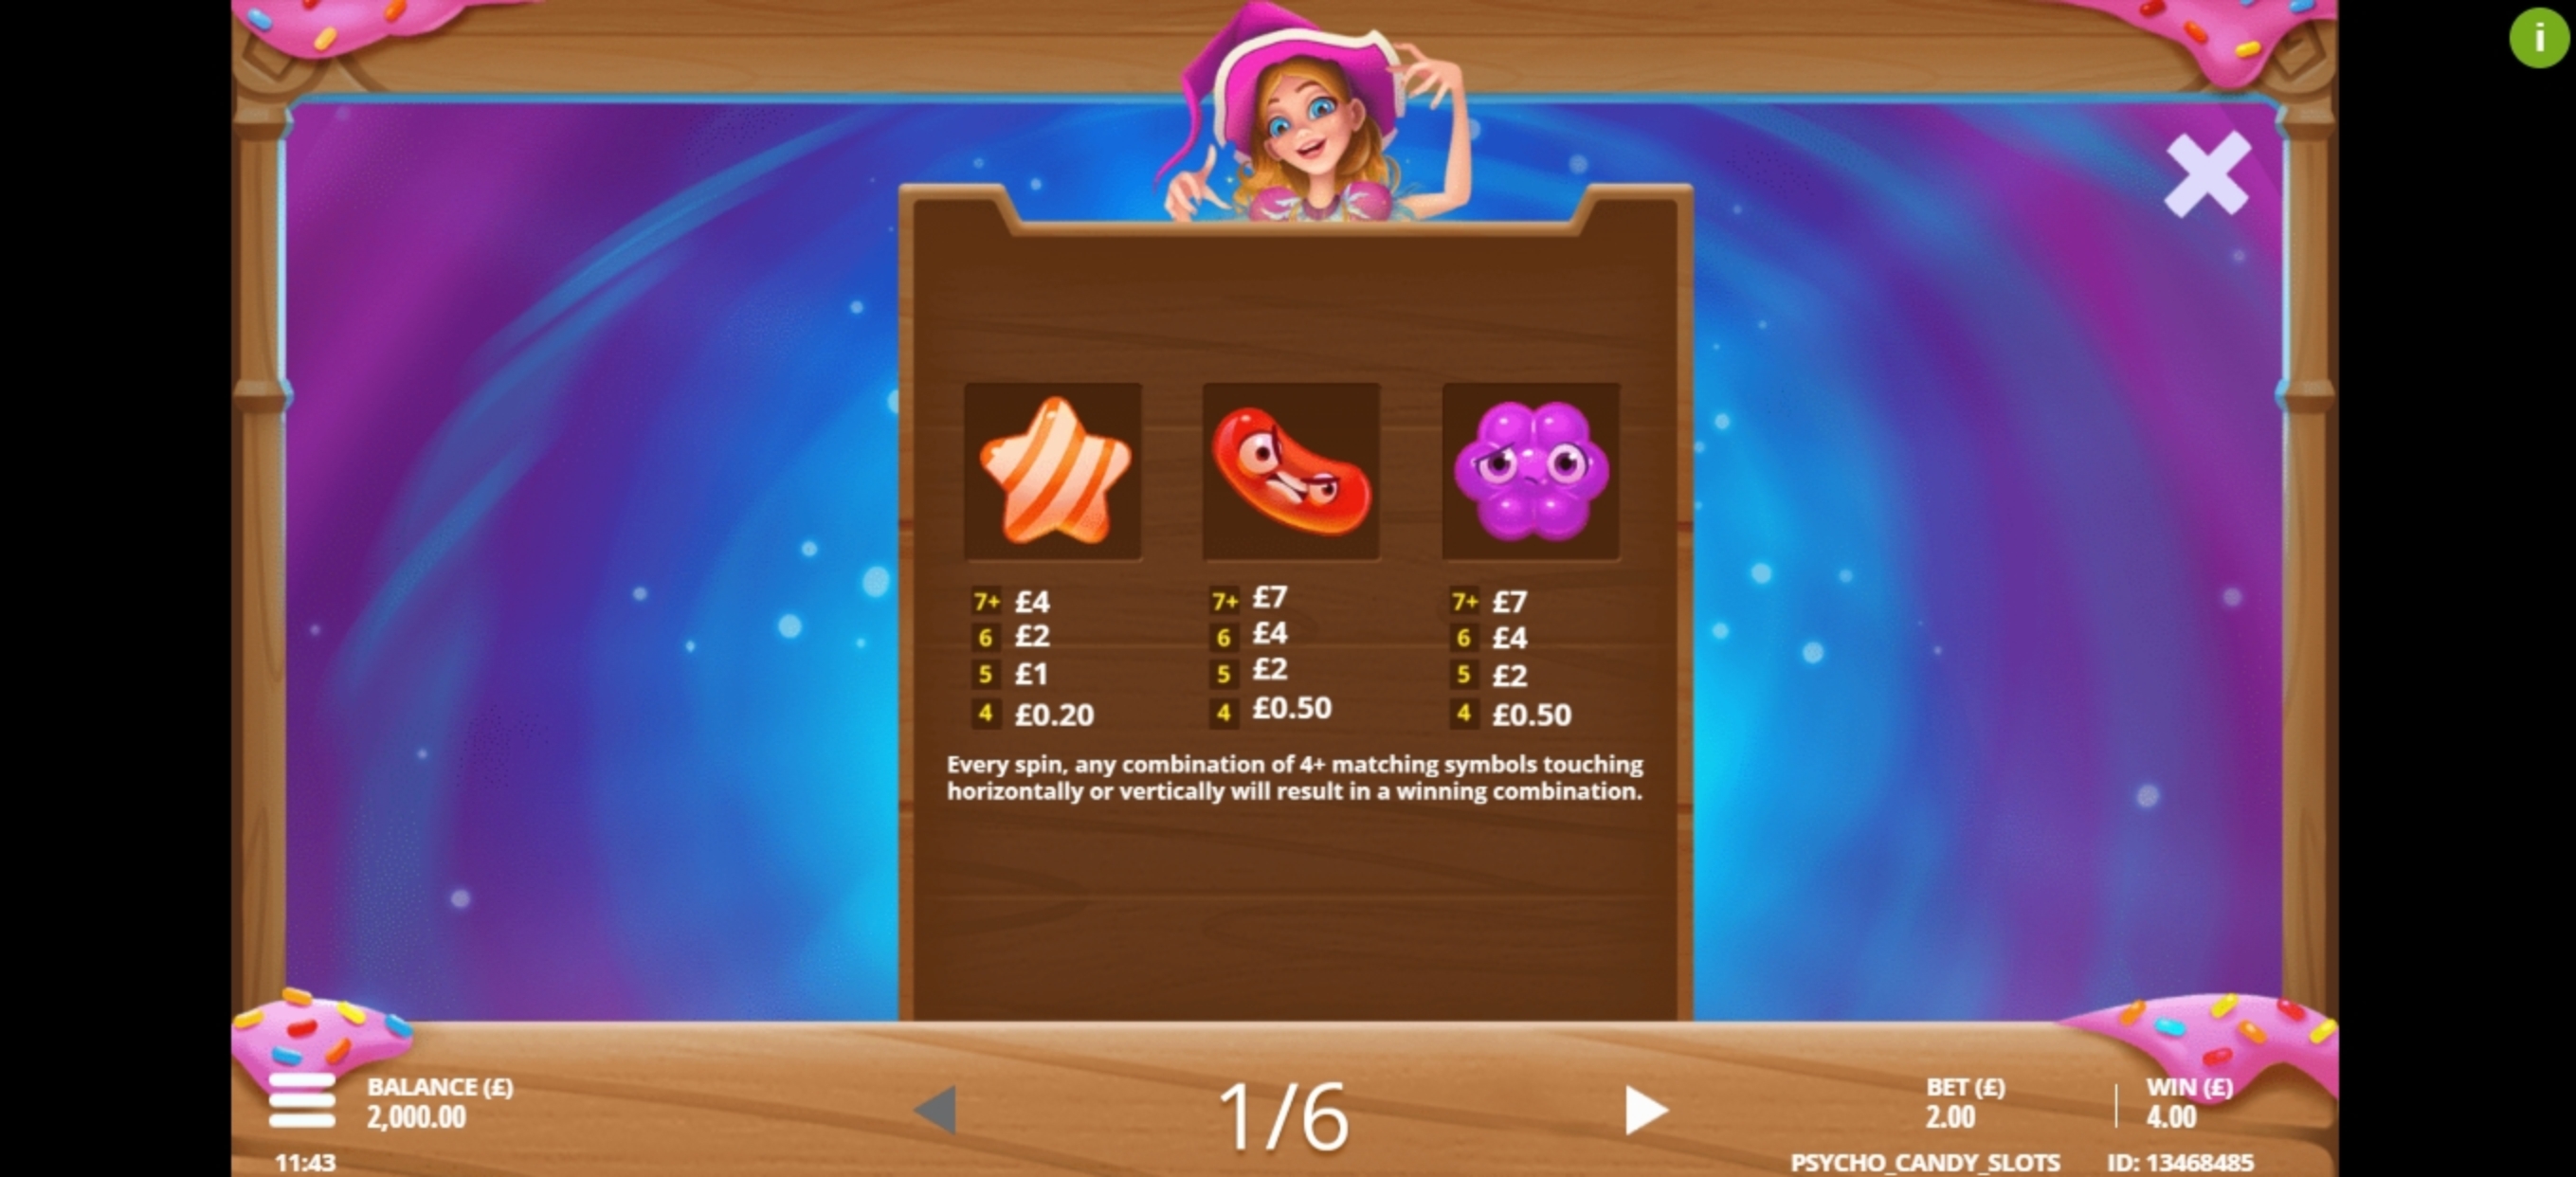 Info of Psycho Candies Slot Game by Gluck Games